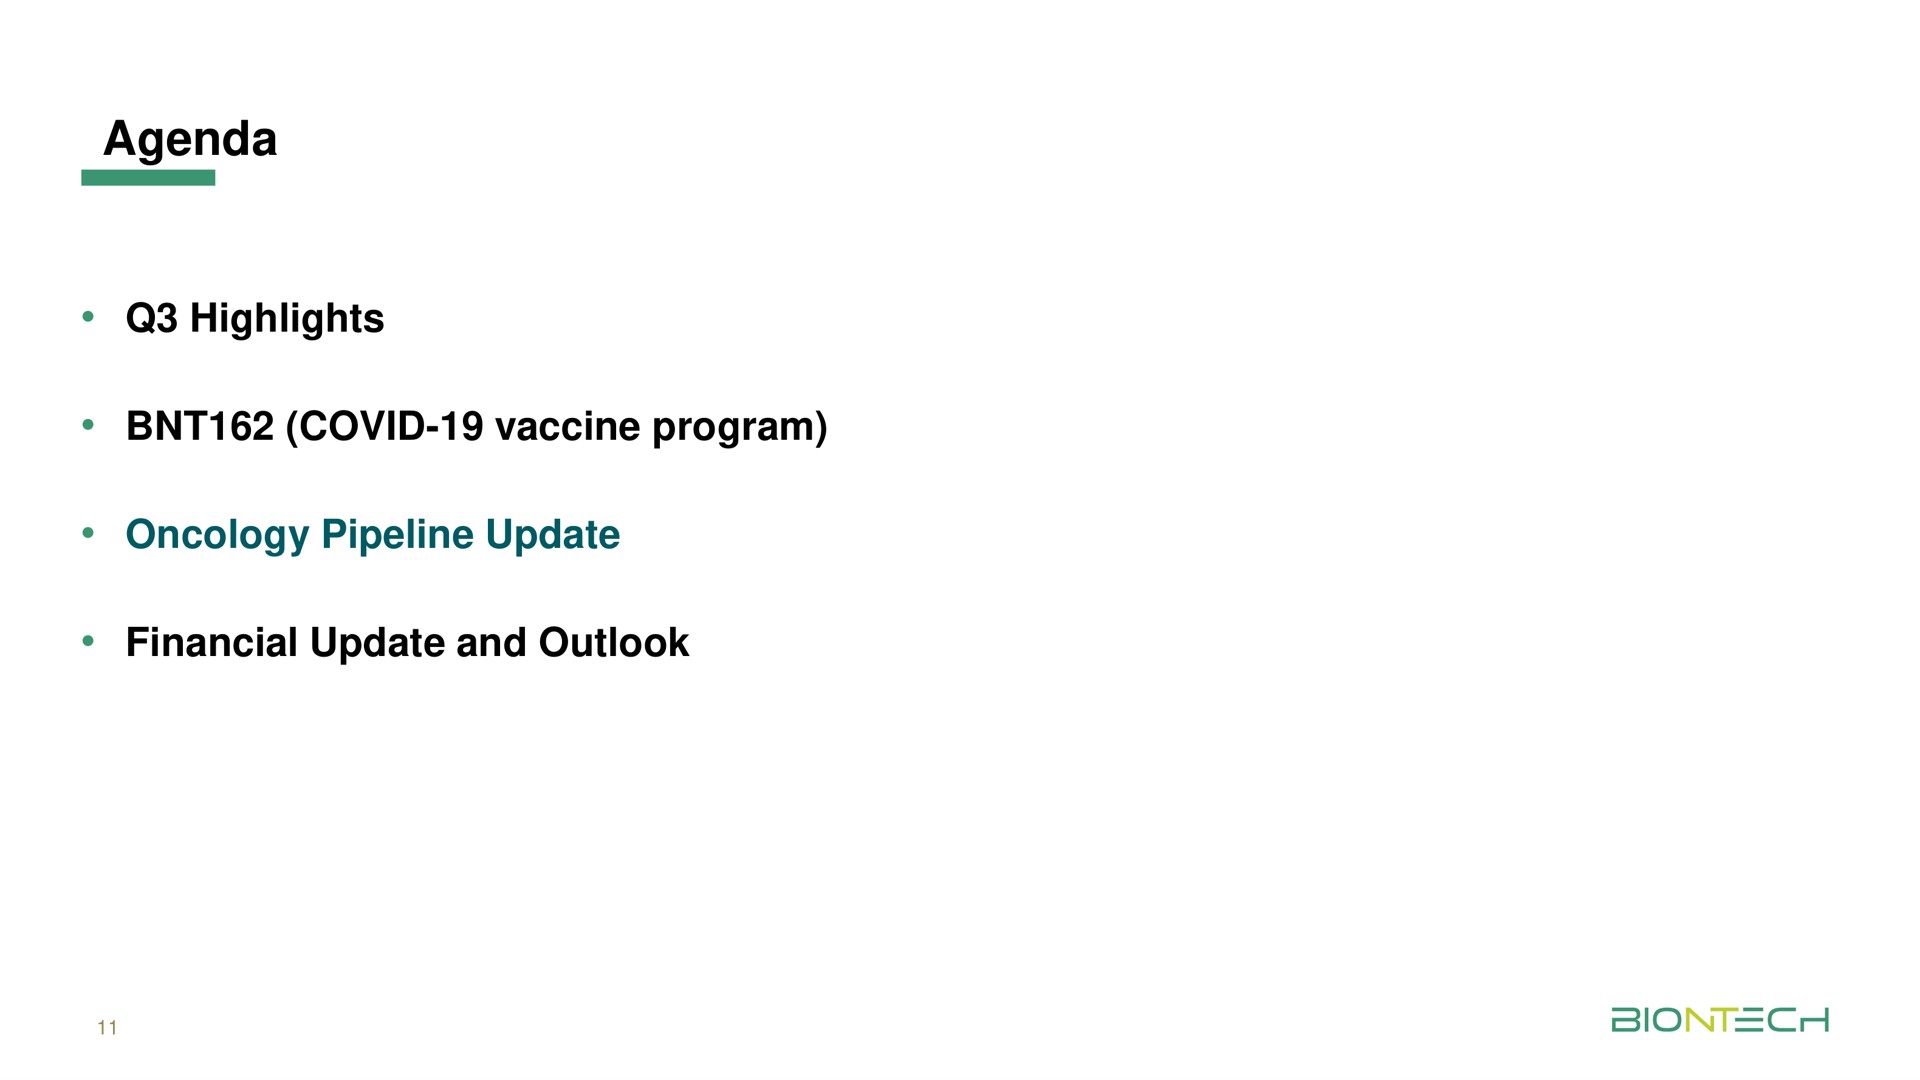 agenda highlights covid vaccine program oncology pipeline update financial update and outlook | BioNTech